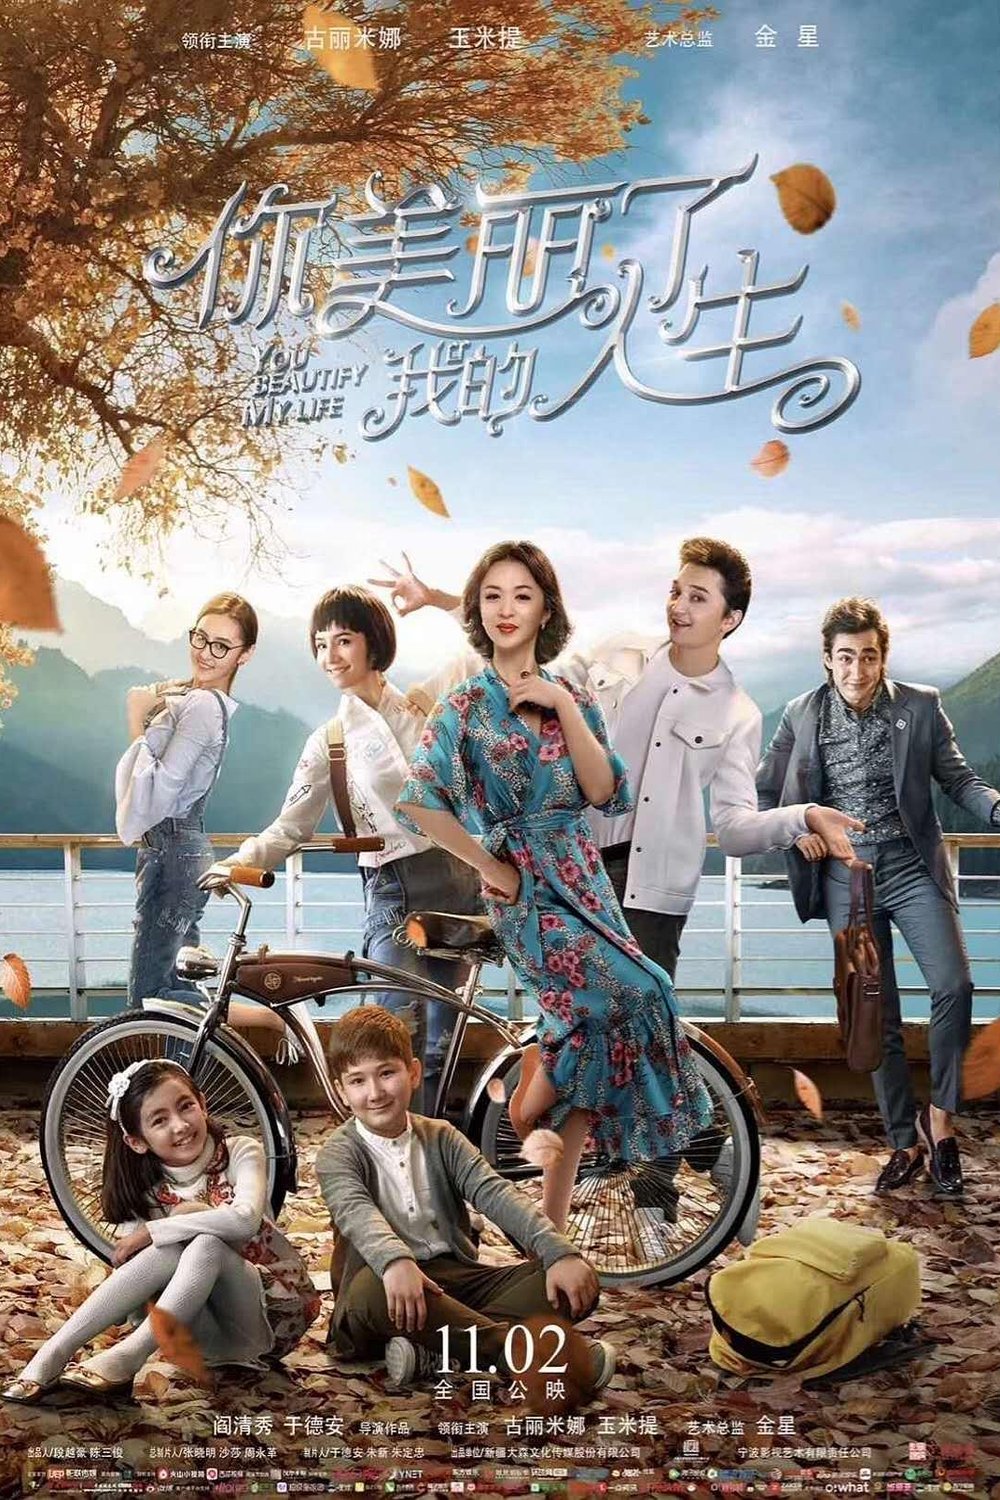 Mandarin poster of the movie You Beautify My Life